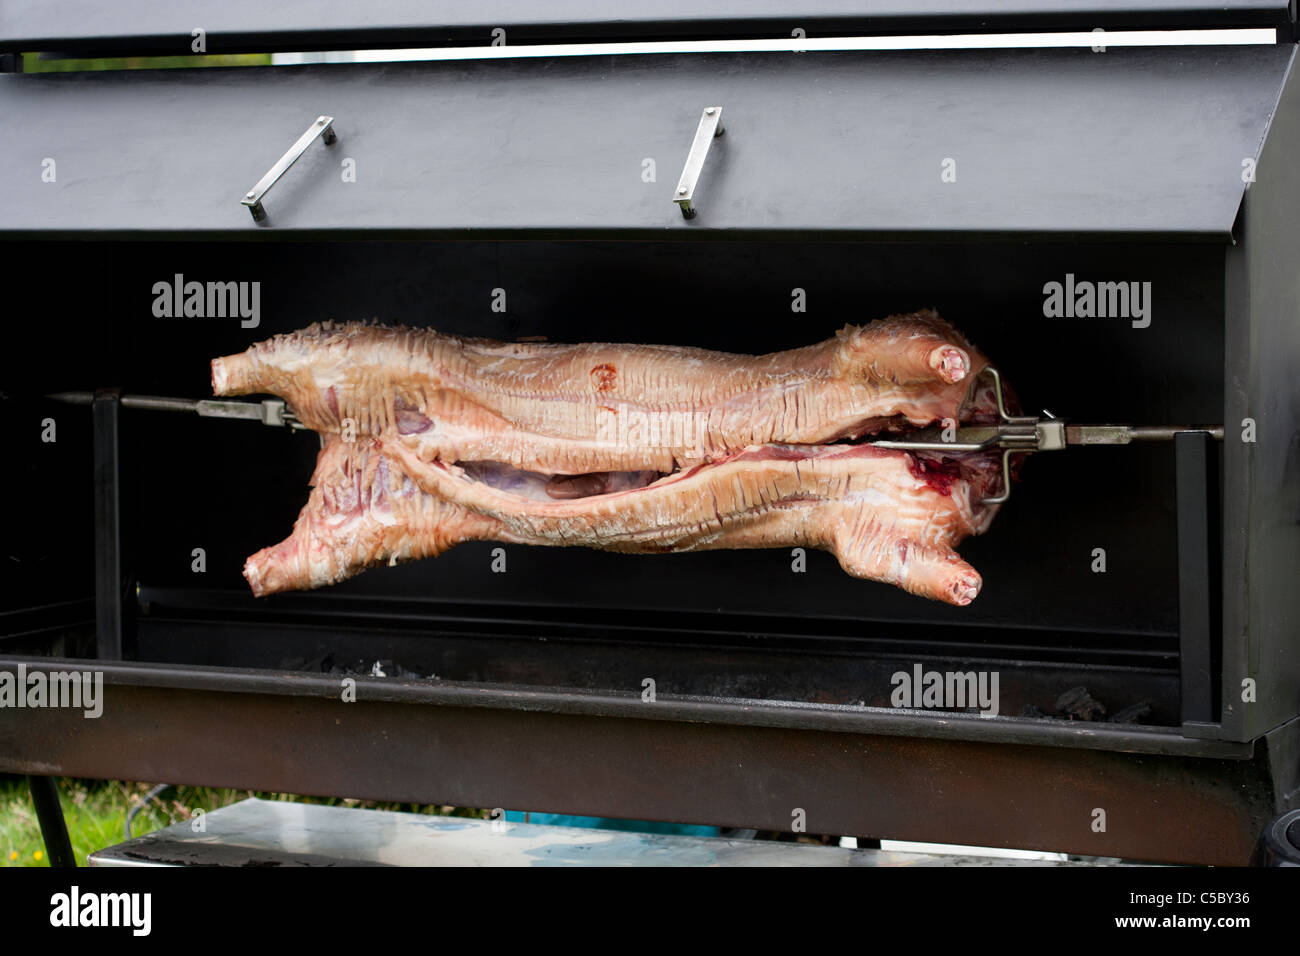 Hog roast cooking on a spit Stock Photo